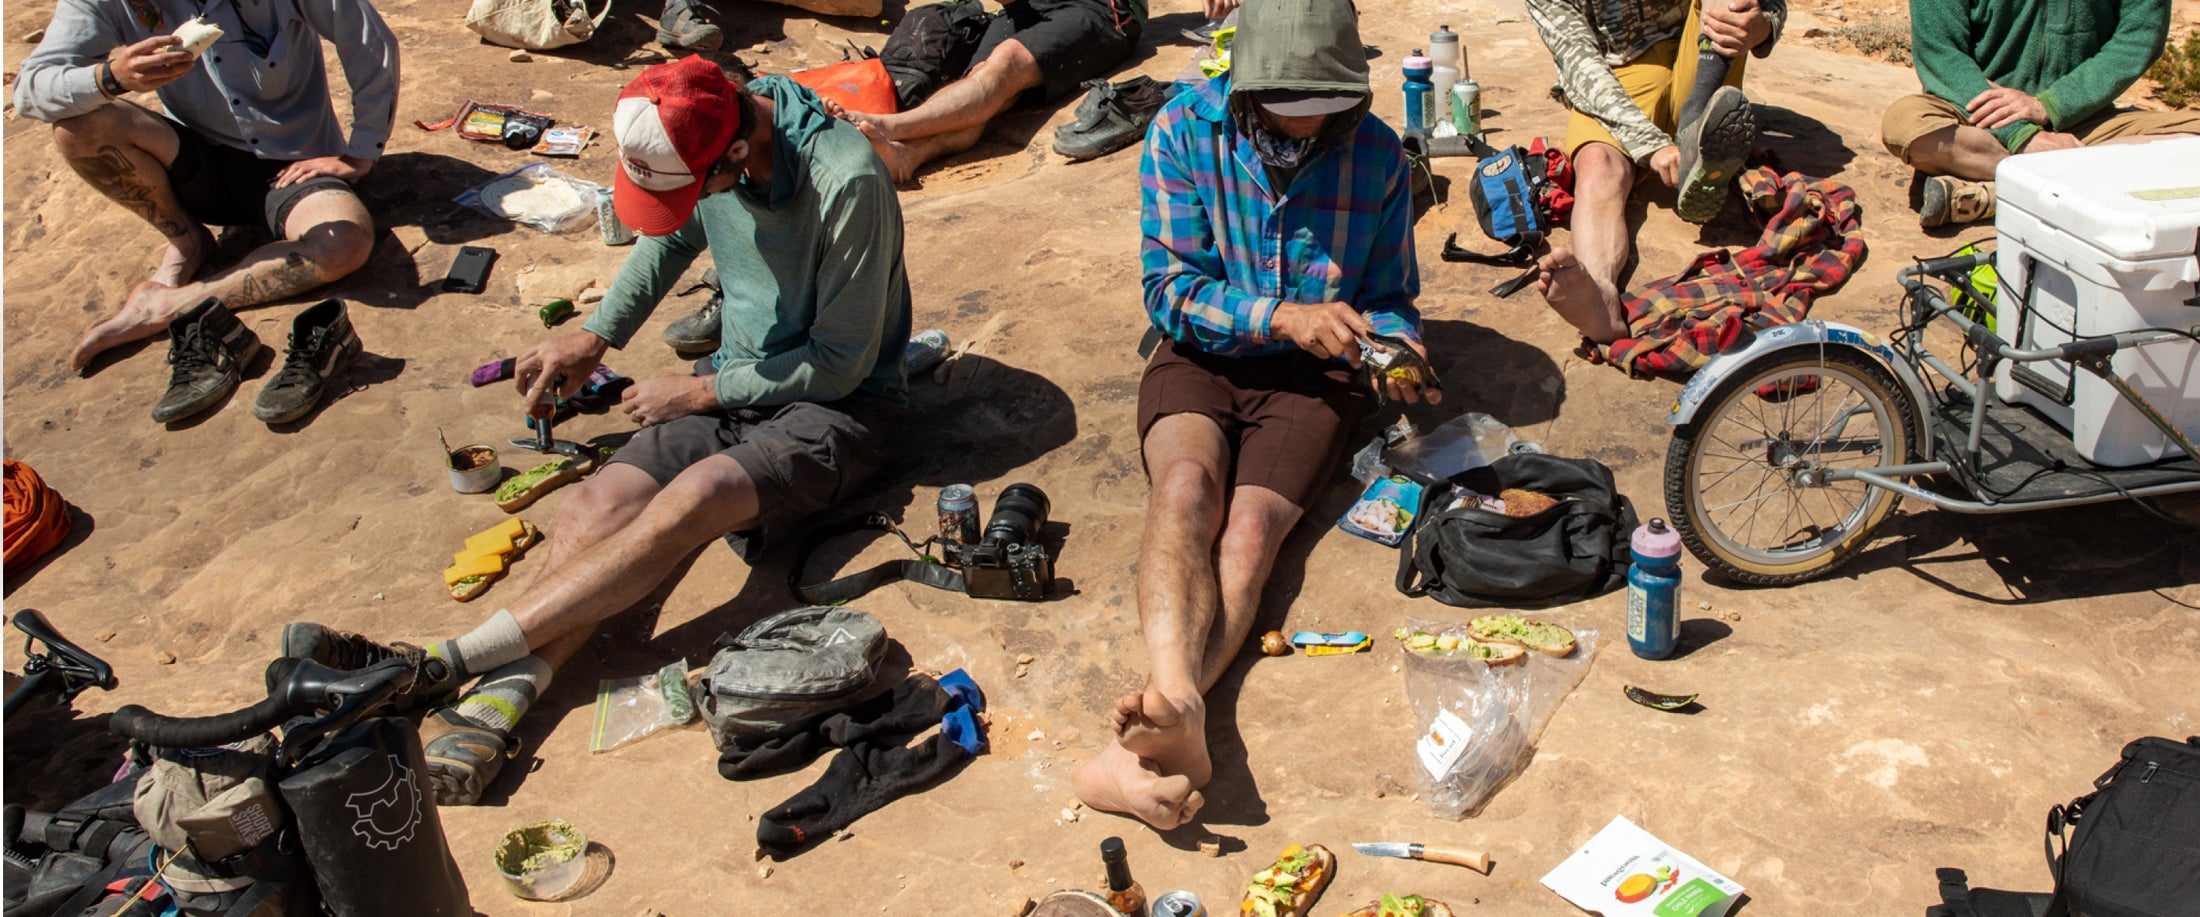 A group of campers spread out on hard packed dirt with snacks, water bottles, and gear